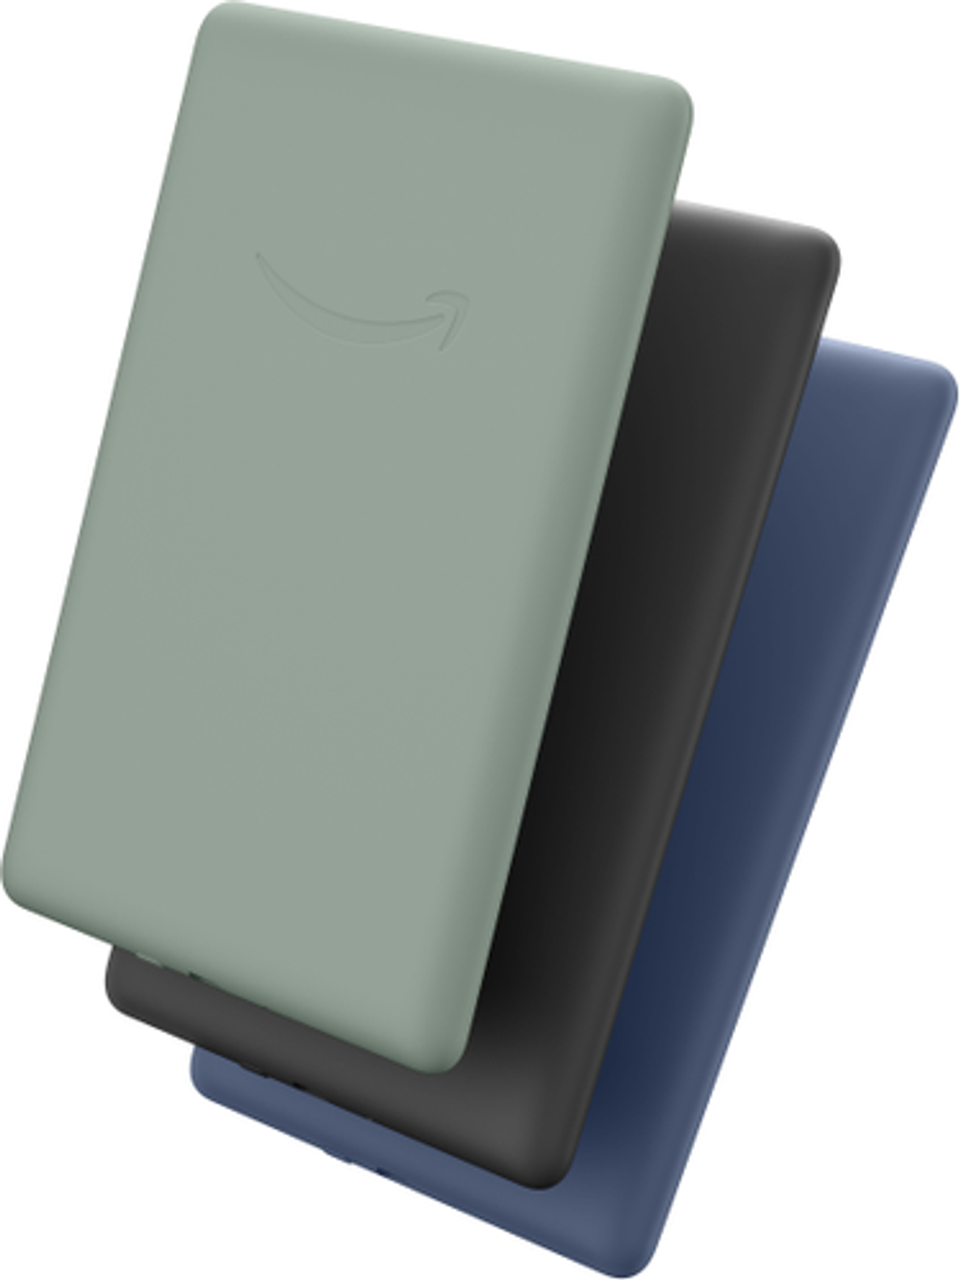 Amazon - Kindle Paperwhite - 2023 - Agave Green